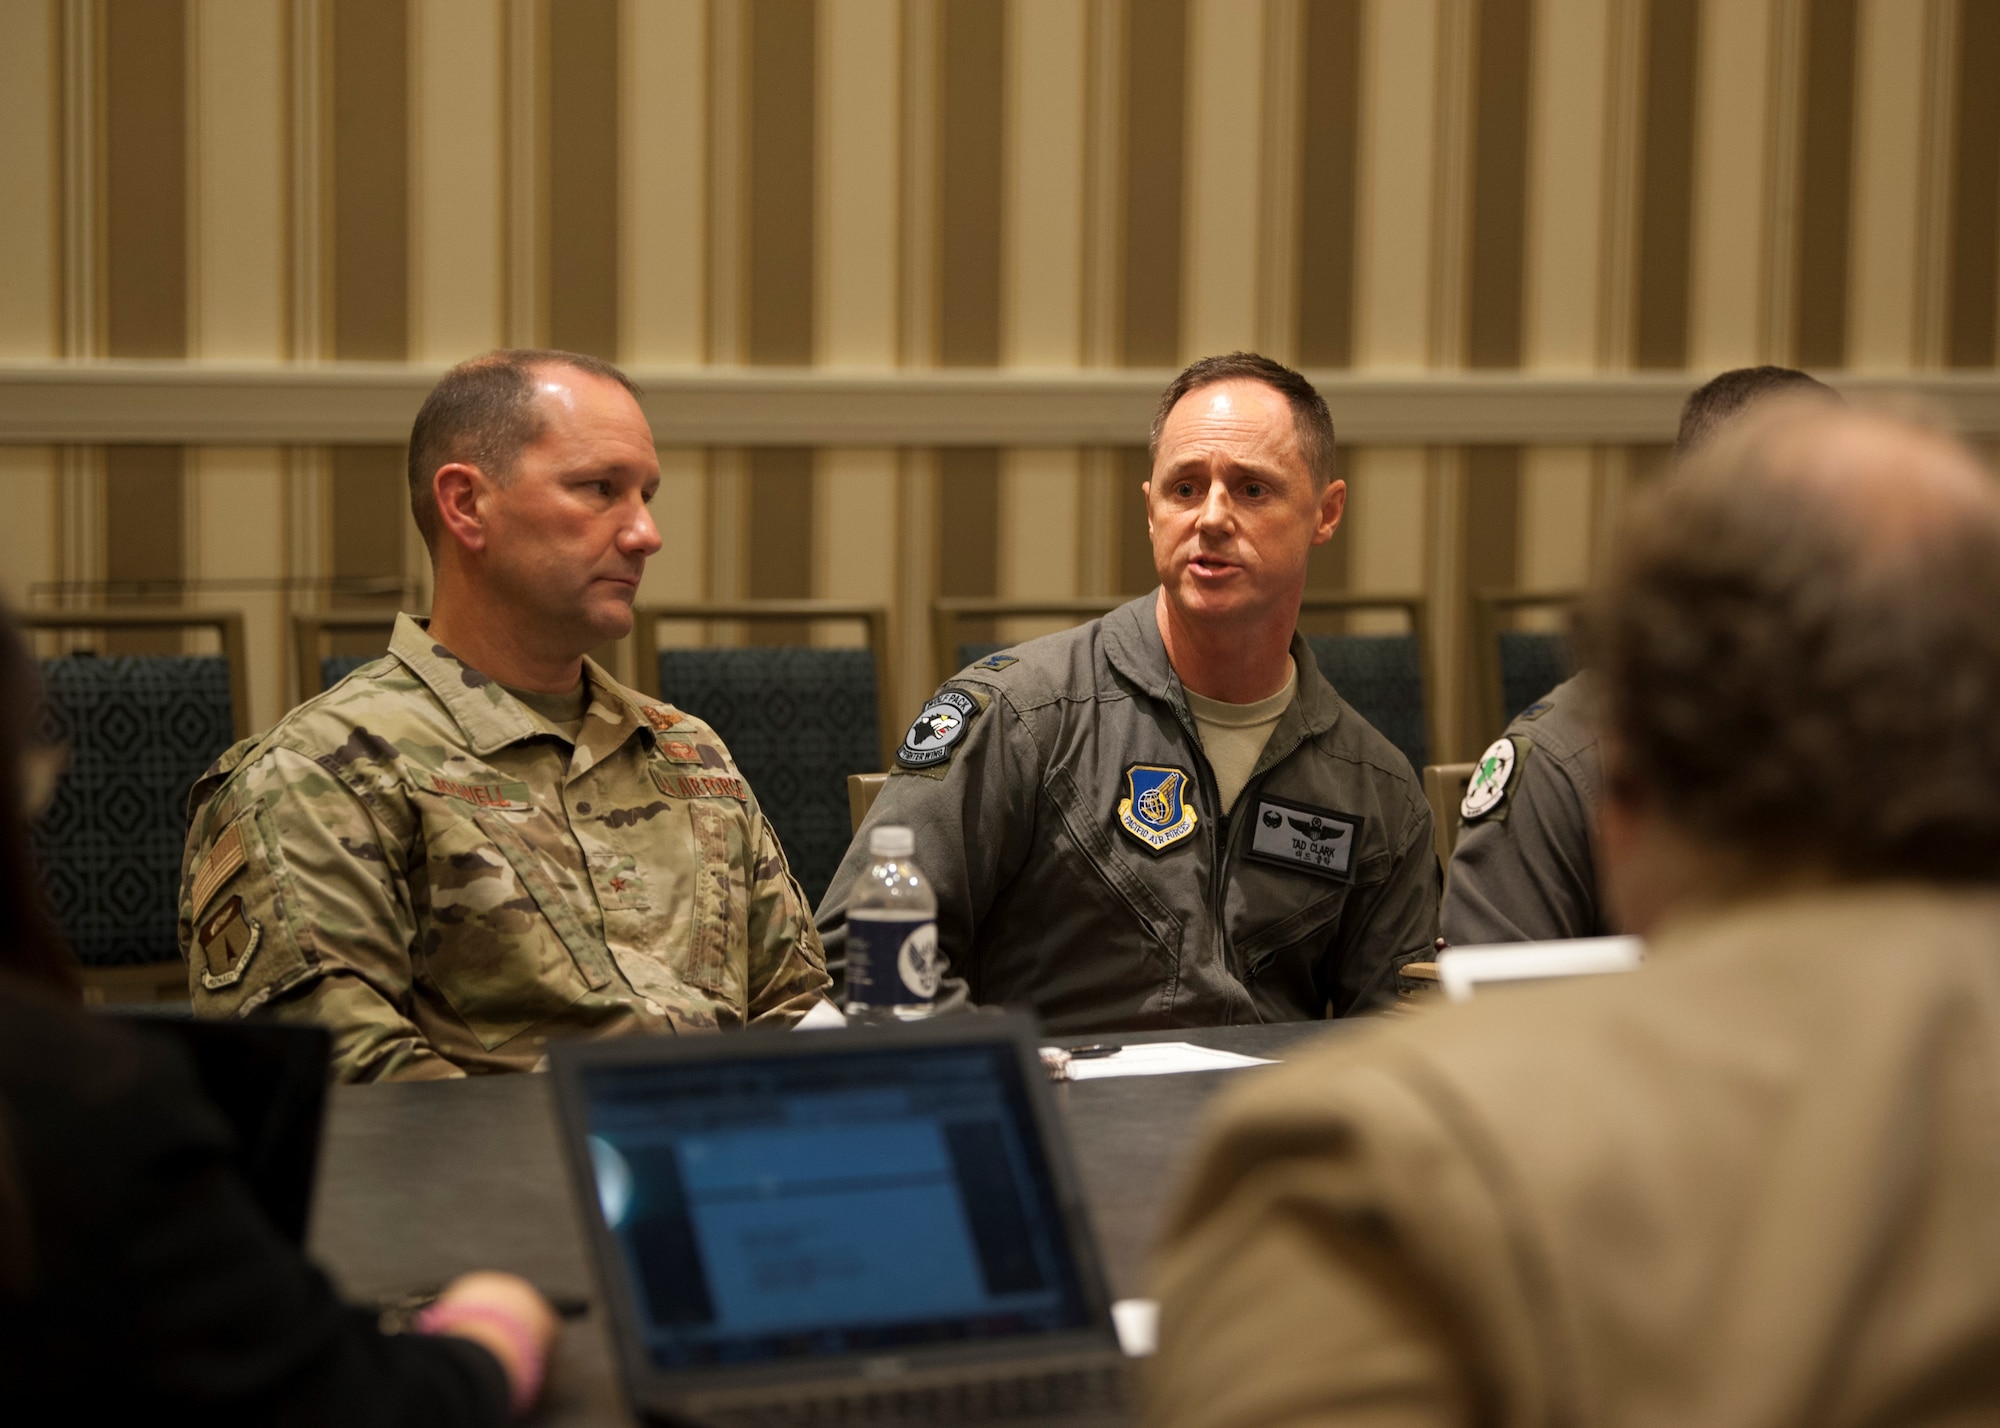 Col. Tad Clark, 8th Fighter Wing commander at Kunsan Air Base, Republic of Korea, addresses a question during a media roundtable at the Gaylord National Resort and Convention Center in National Harbor, Md., Sept. 17, 2019. Wing commanders from across Pacific Air Forces participated in the roundtable during the 2019 Air Force Association’s Air Space and Cyber Conference. (U.S. Air Force photo by Staff Sgt. Mikaley Kline)